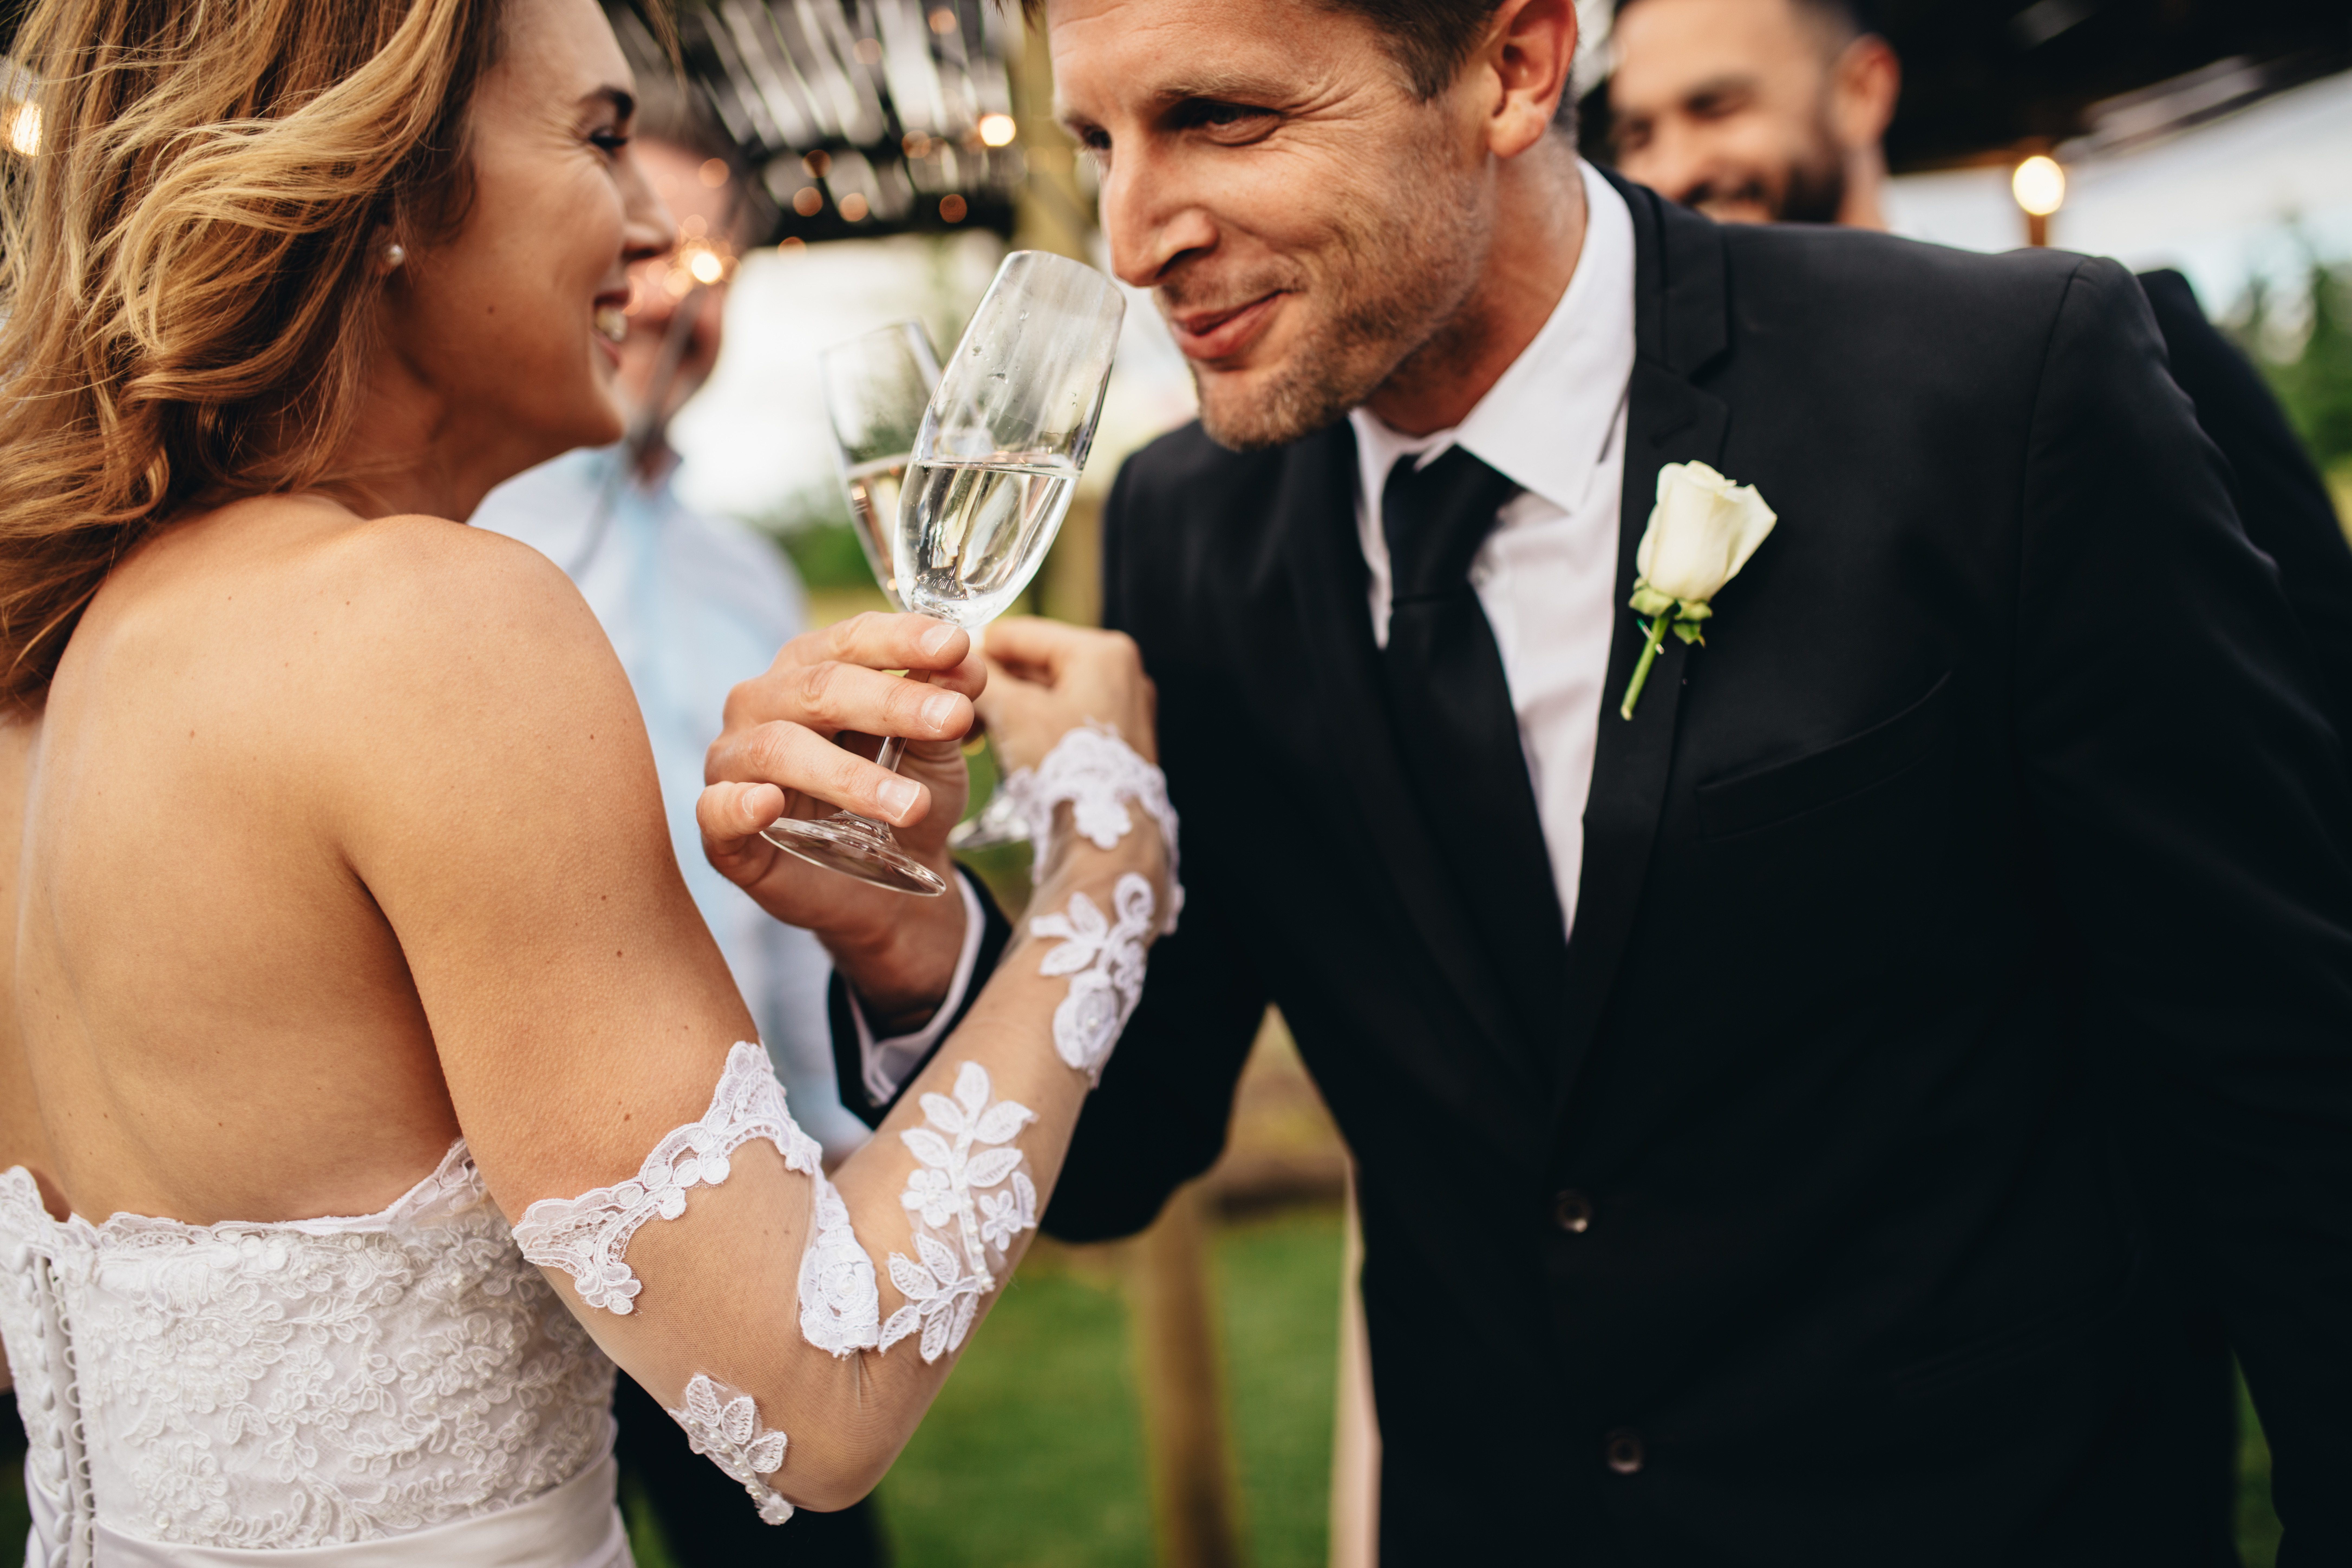 A bride and groom link arms in a champagne toast.